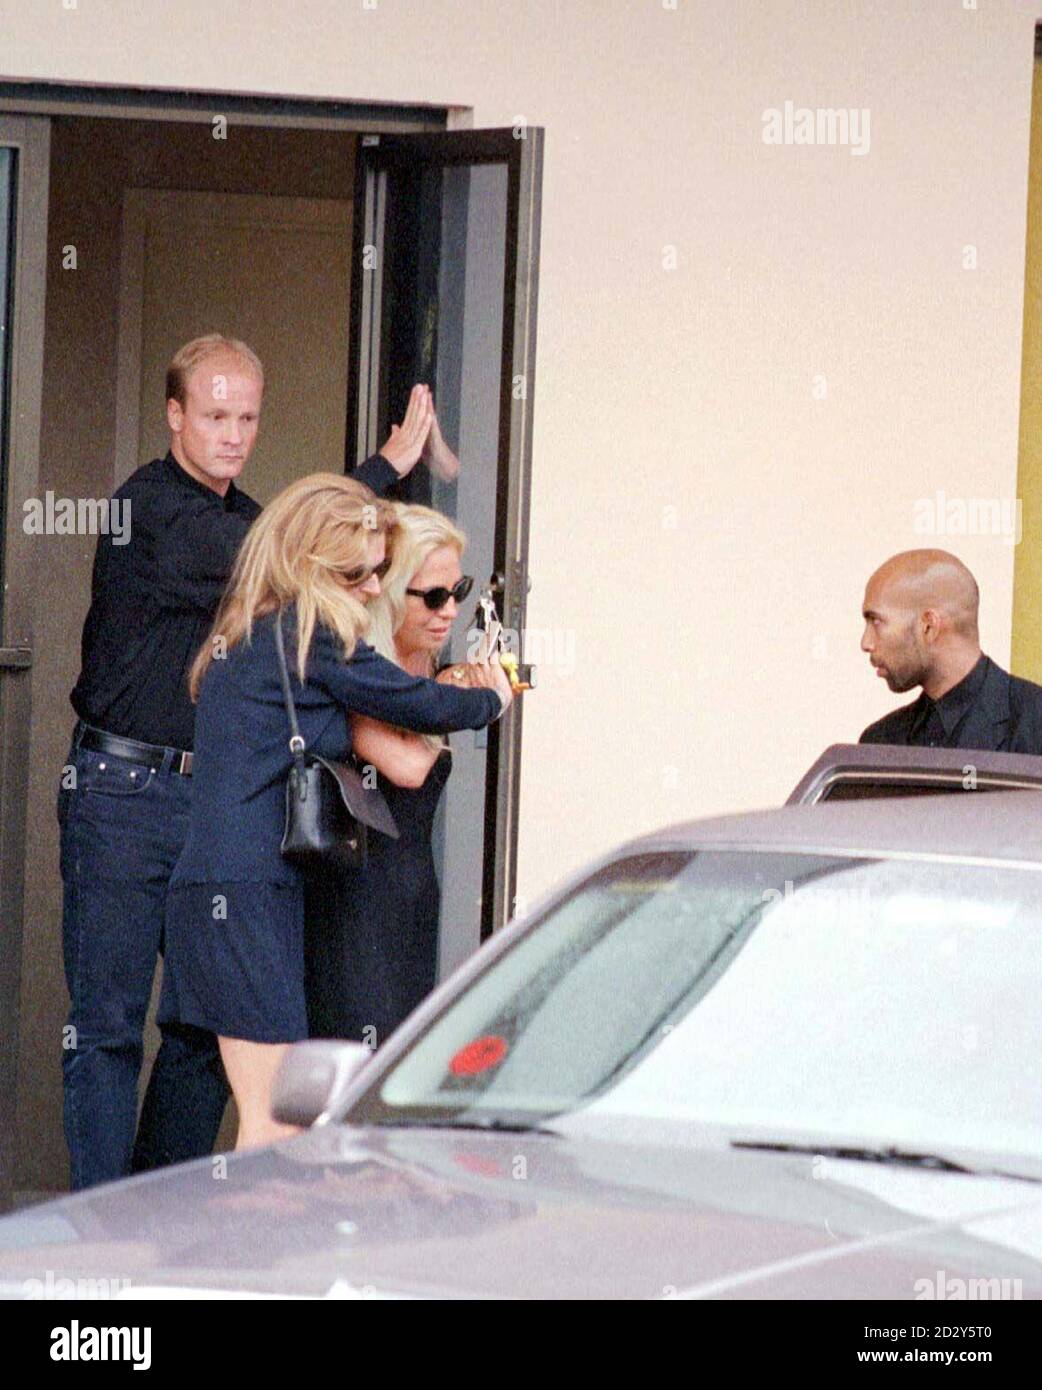 PA NEWS PHOTO : 16/7/97 : DONATELLA VERSACE LEAVES RIVERSIDE GORDON  MEMORIAL CHAPELS FOLLOWING THE FUNERAL SERVICE FOR HER BROTHER, FASHION  DESIGNER, GIANNI VERSACE Stock Photo - Alamy